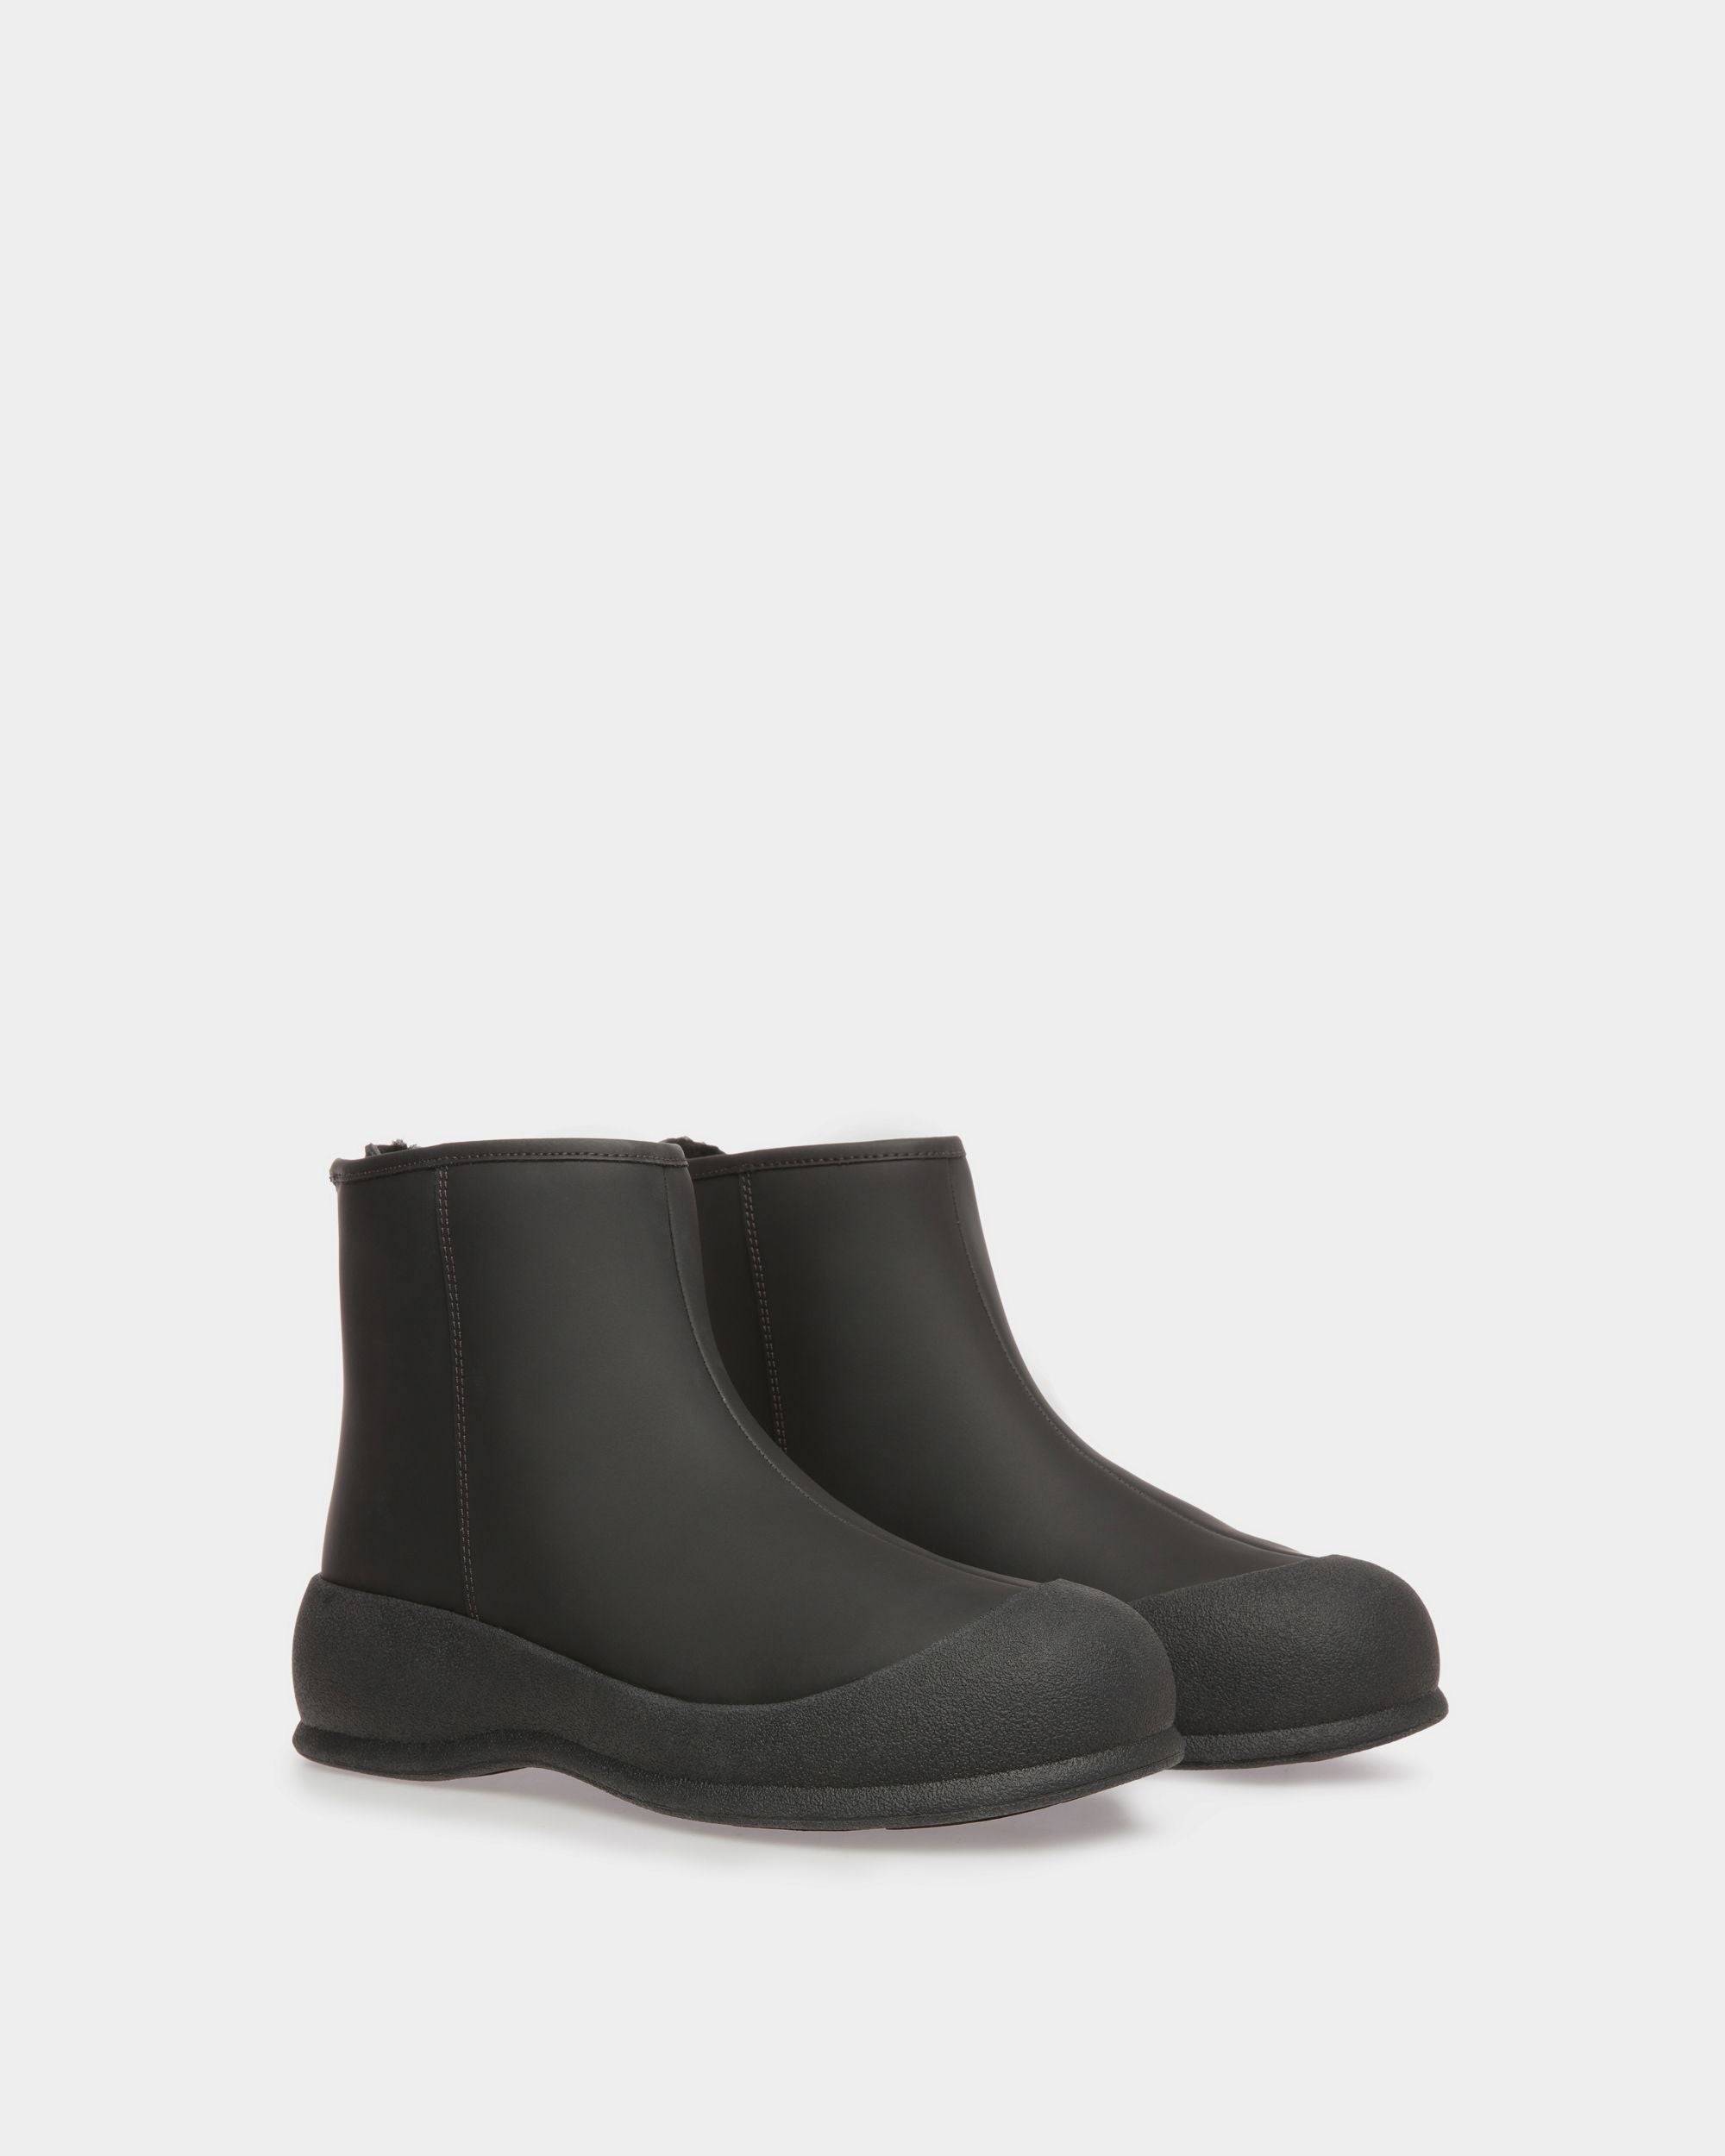 Carsey | Women's Boots | Black Leather | Bally | Still Life 3/4 Front